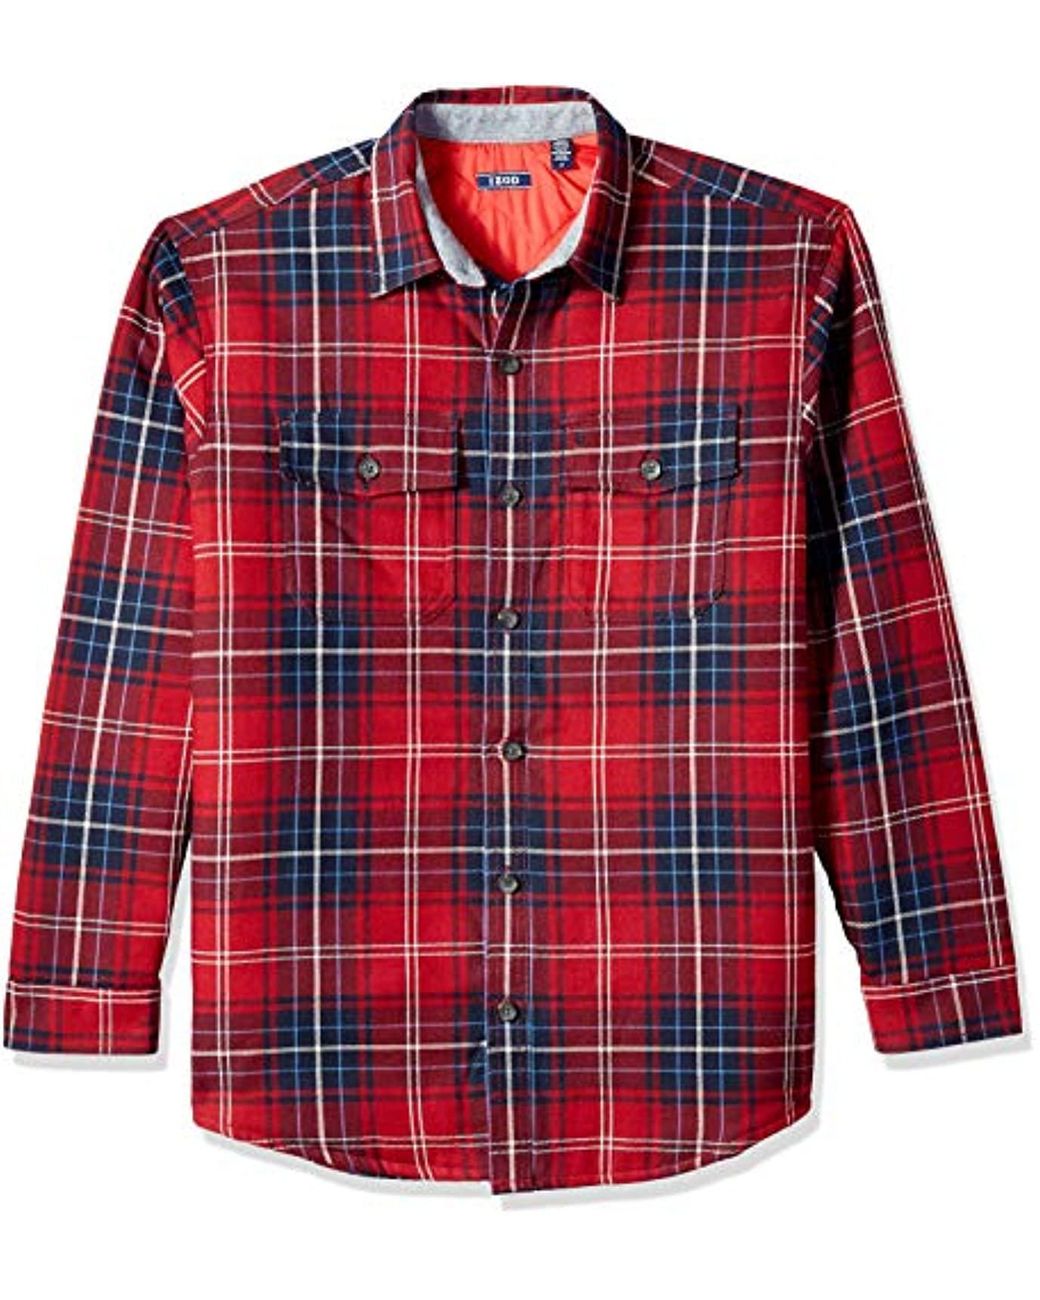 Izod Cotton Adirondack Quilted Plaid Jacket in Red for Men - Save 79% ...